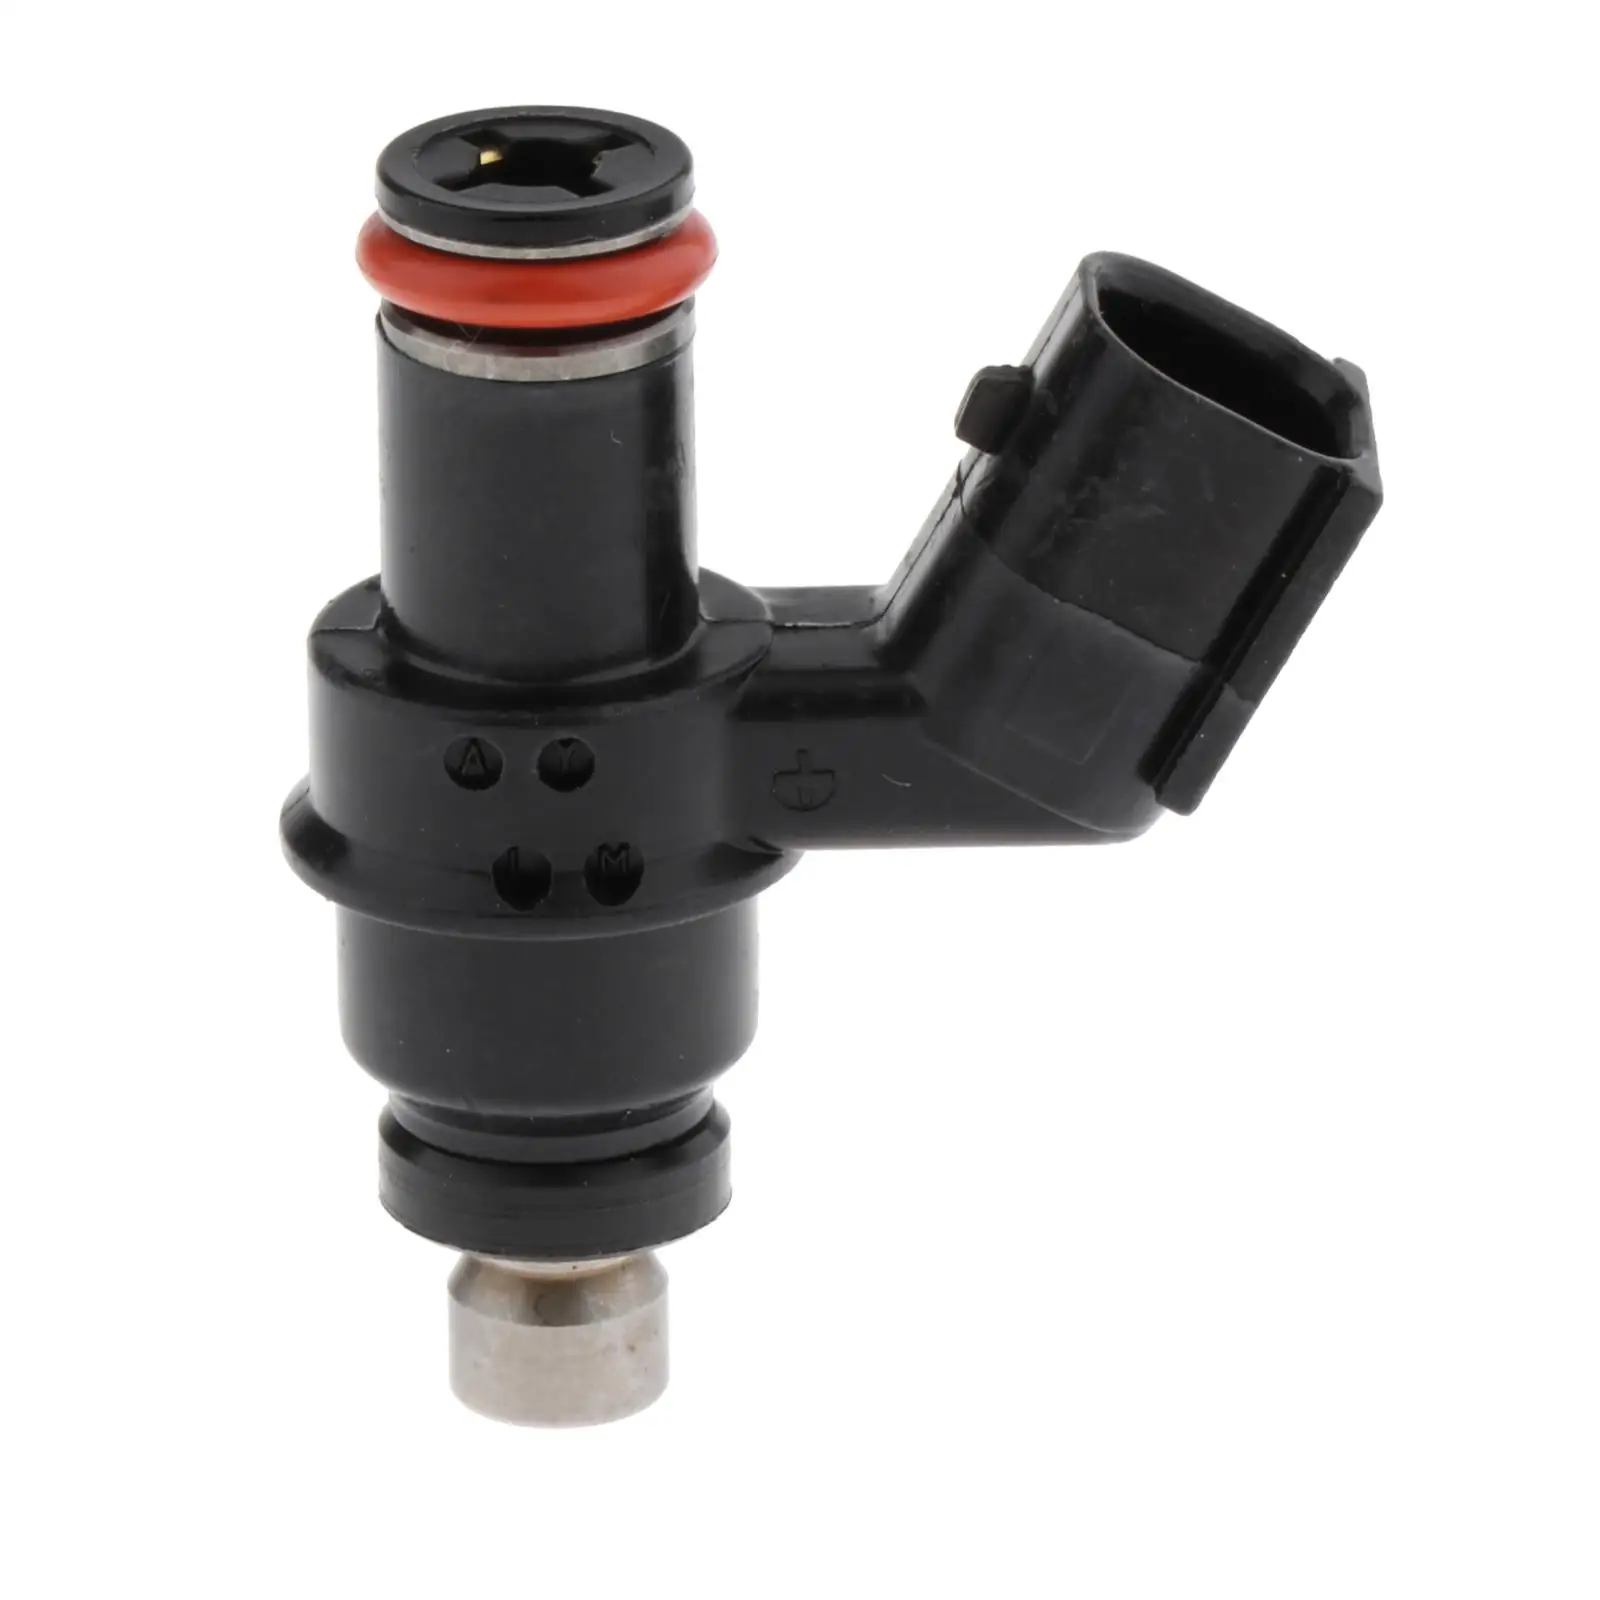 High quality 1PCS Professional Fuel Injector For Honda Outboard BF50D BF40D